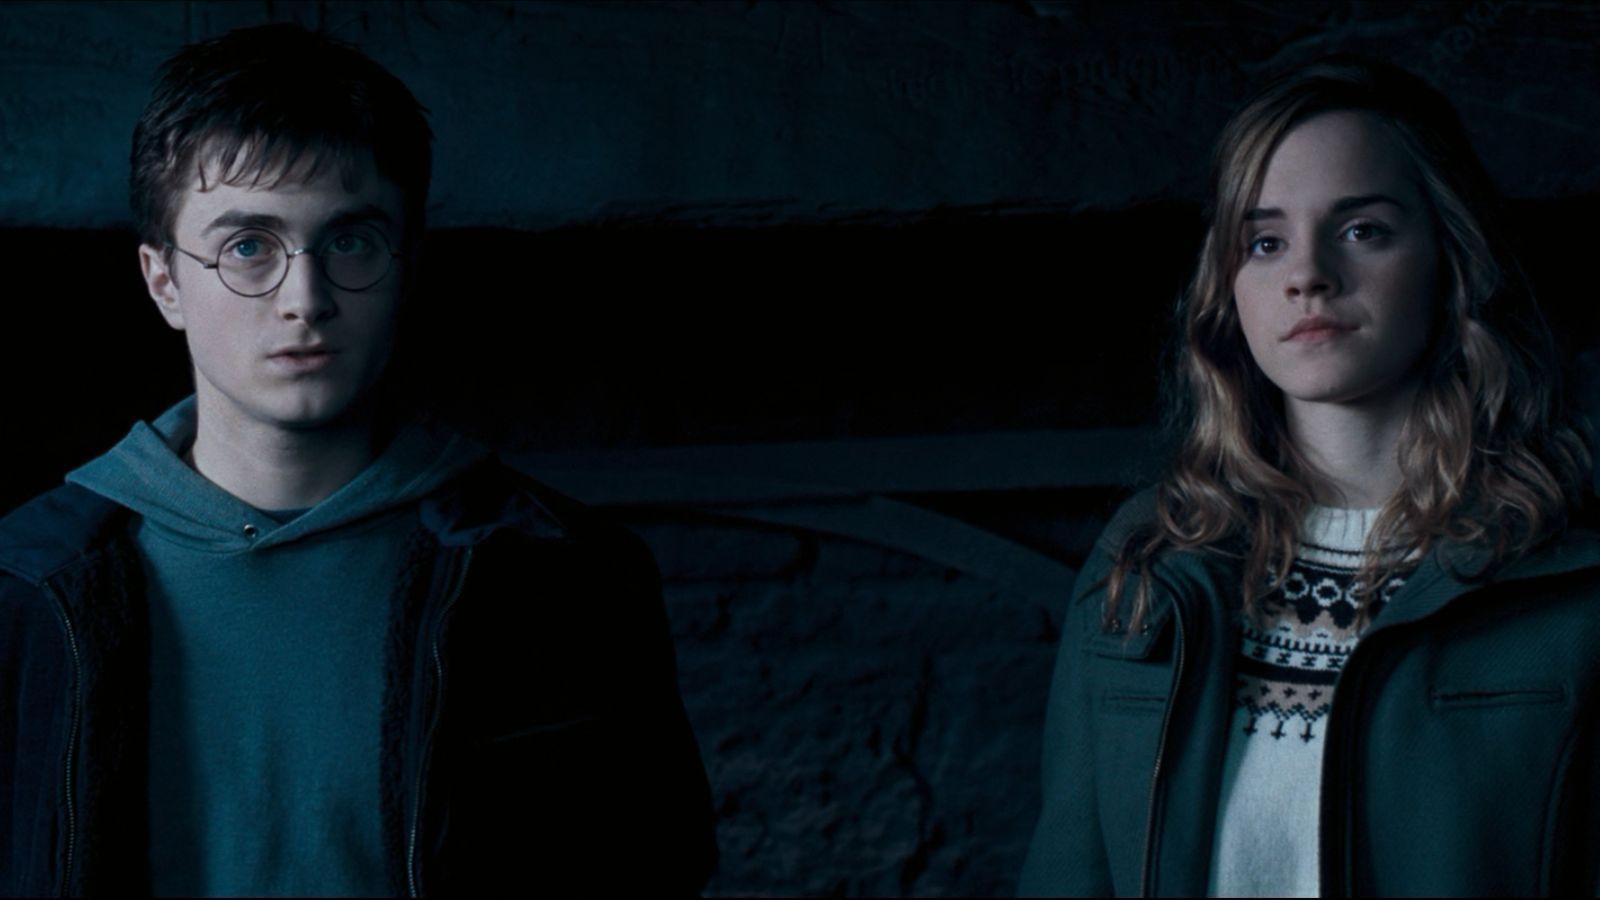 Emma Watson as Hermione Granger and Daniel Radcliffe as Harry Potter in The Half-Blood Prince.